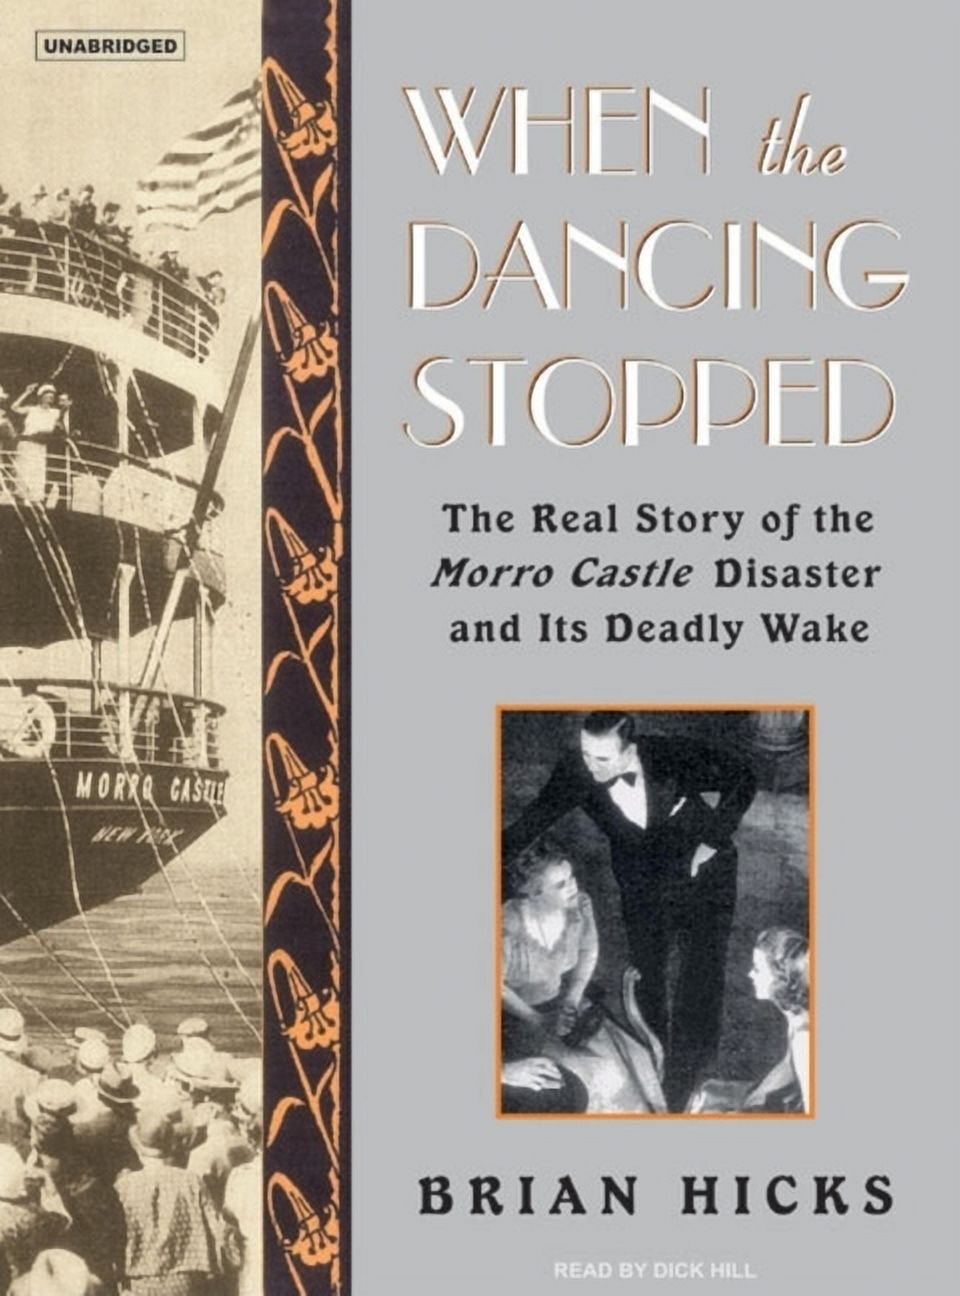 When the Dancing Stopped: The Real Story of the Morro Castle Disaster and Its Deadly Wake (Audiobook) - image 1 of 1